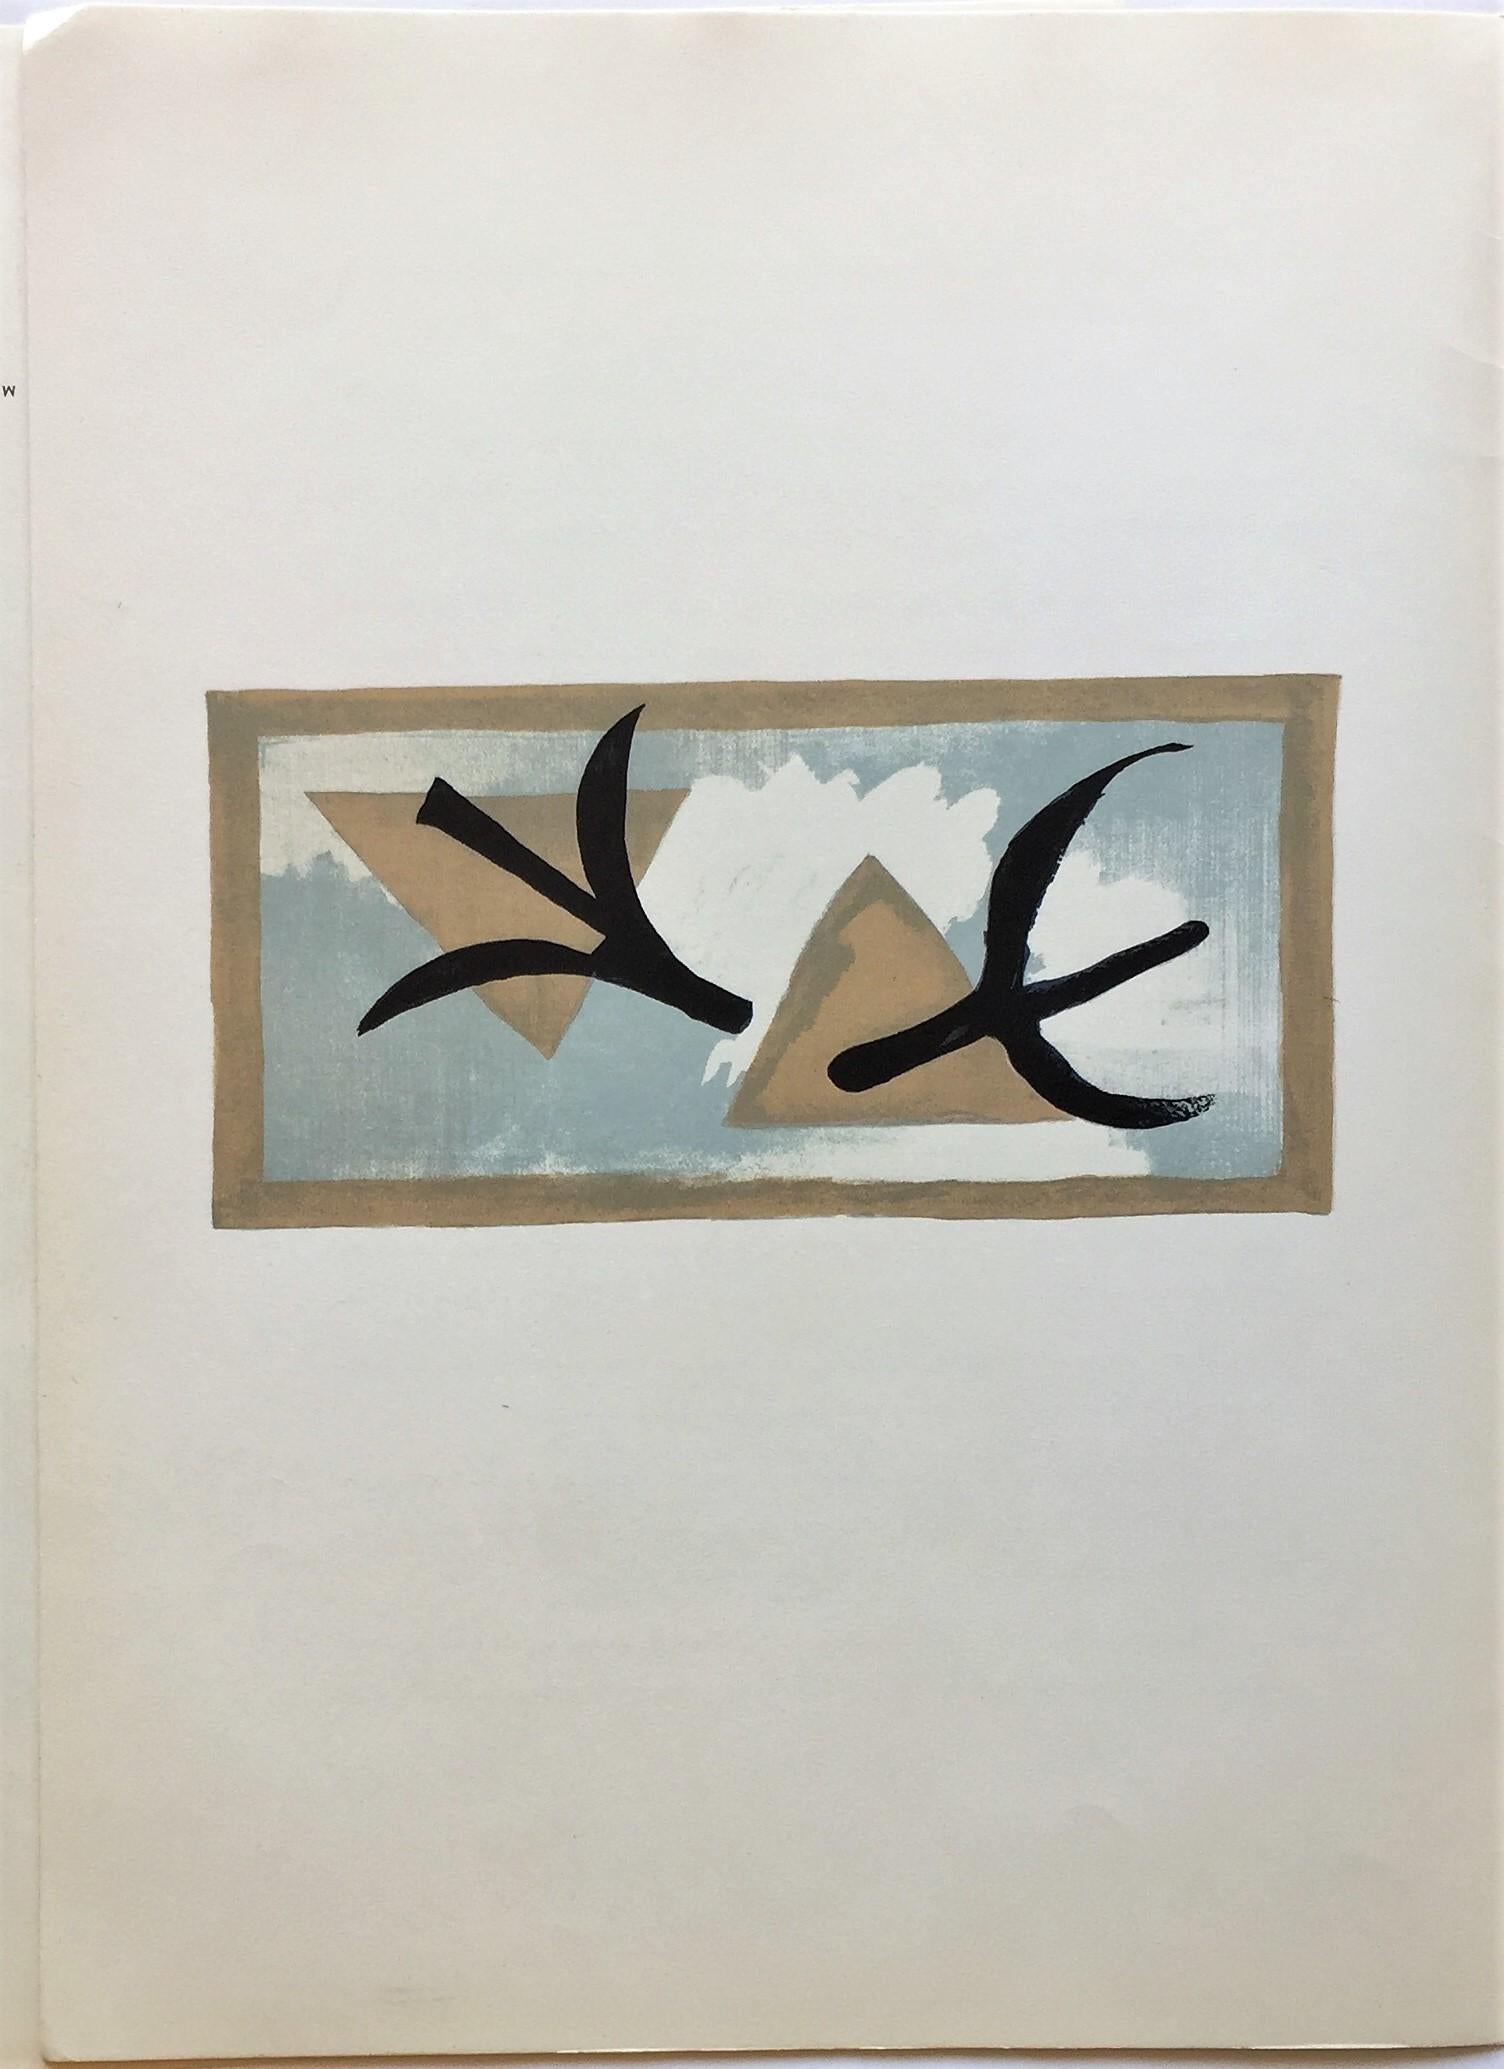 Les martinets (black swifts) - Print by (after) Georges Braque